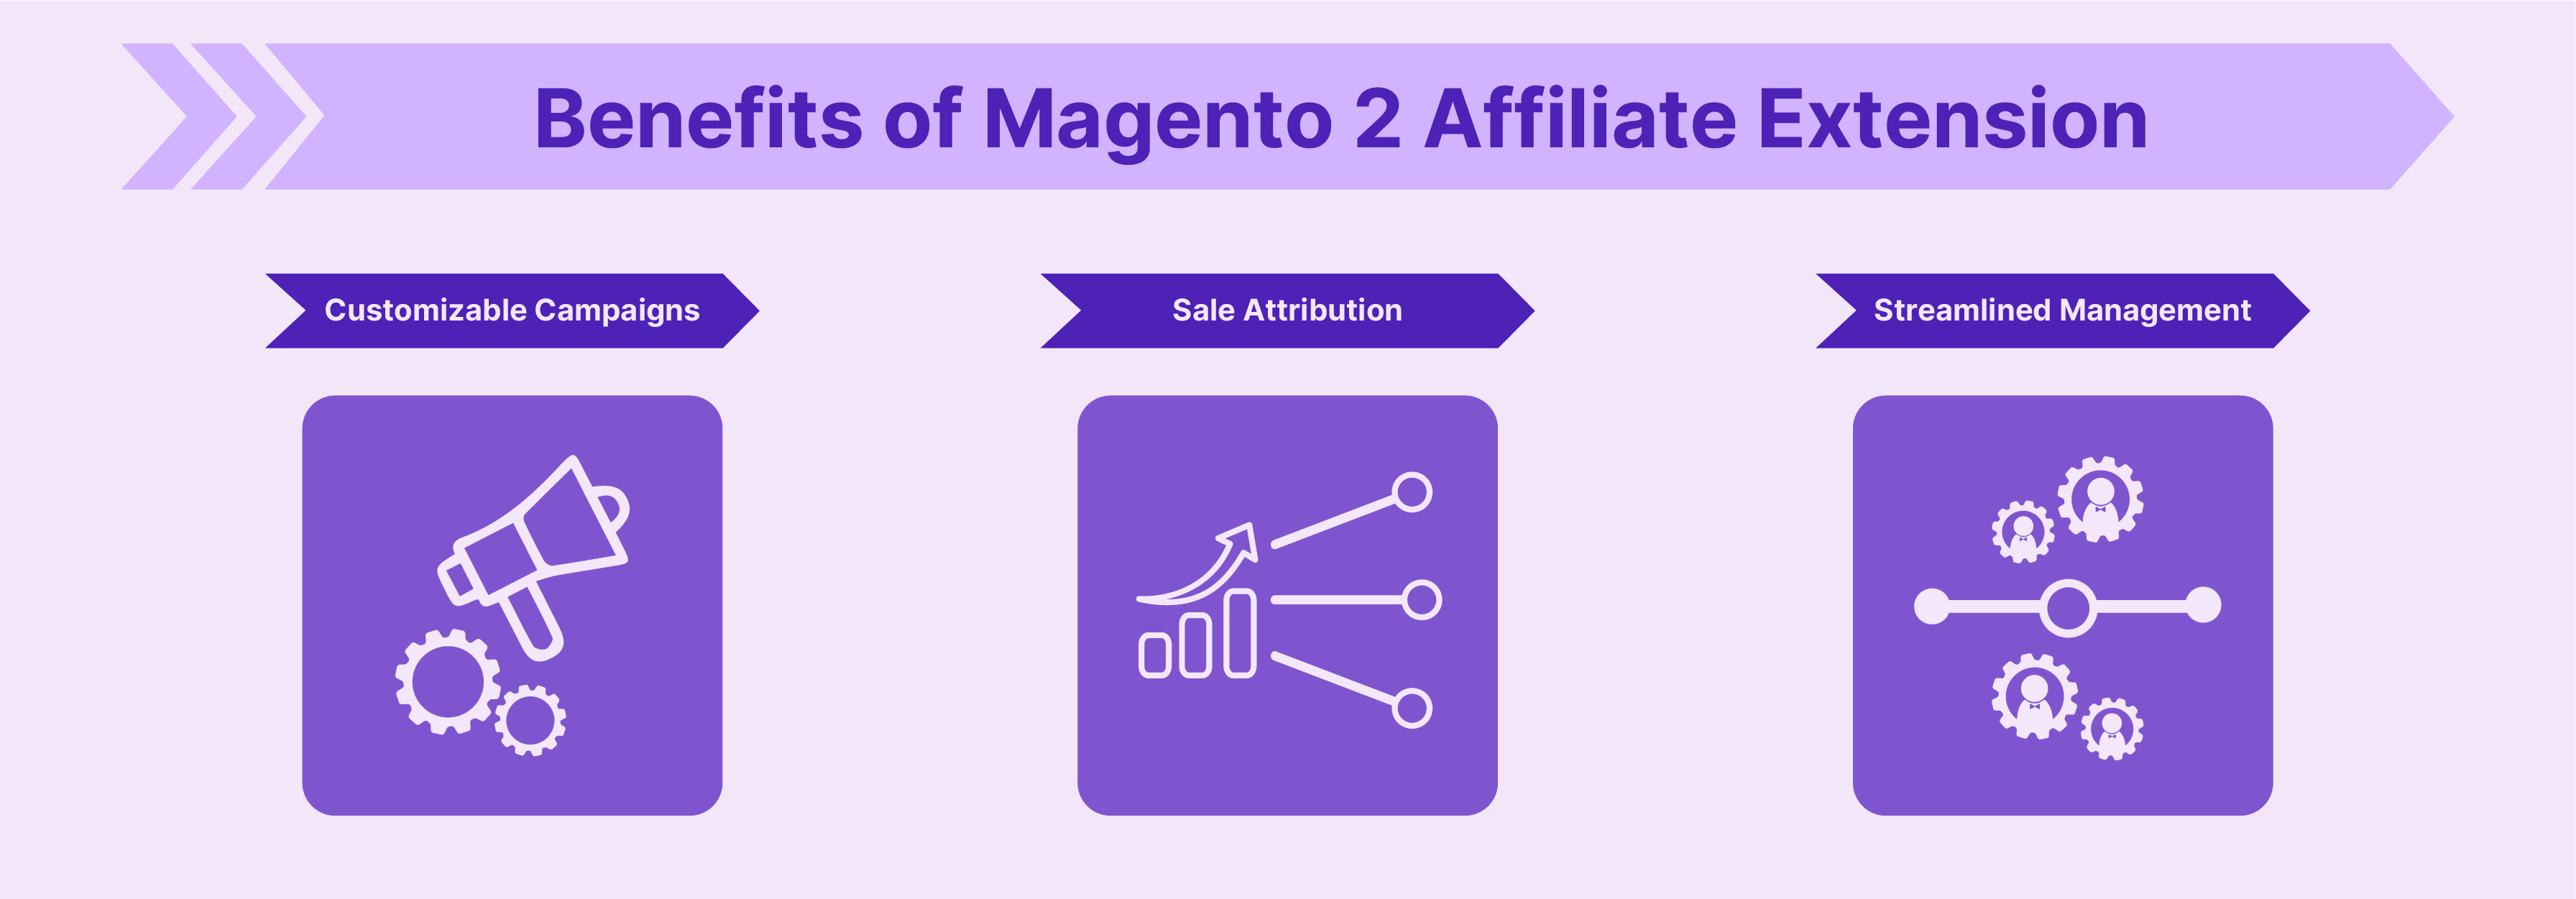 Benefits of Magento 2 Affiliate Extension